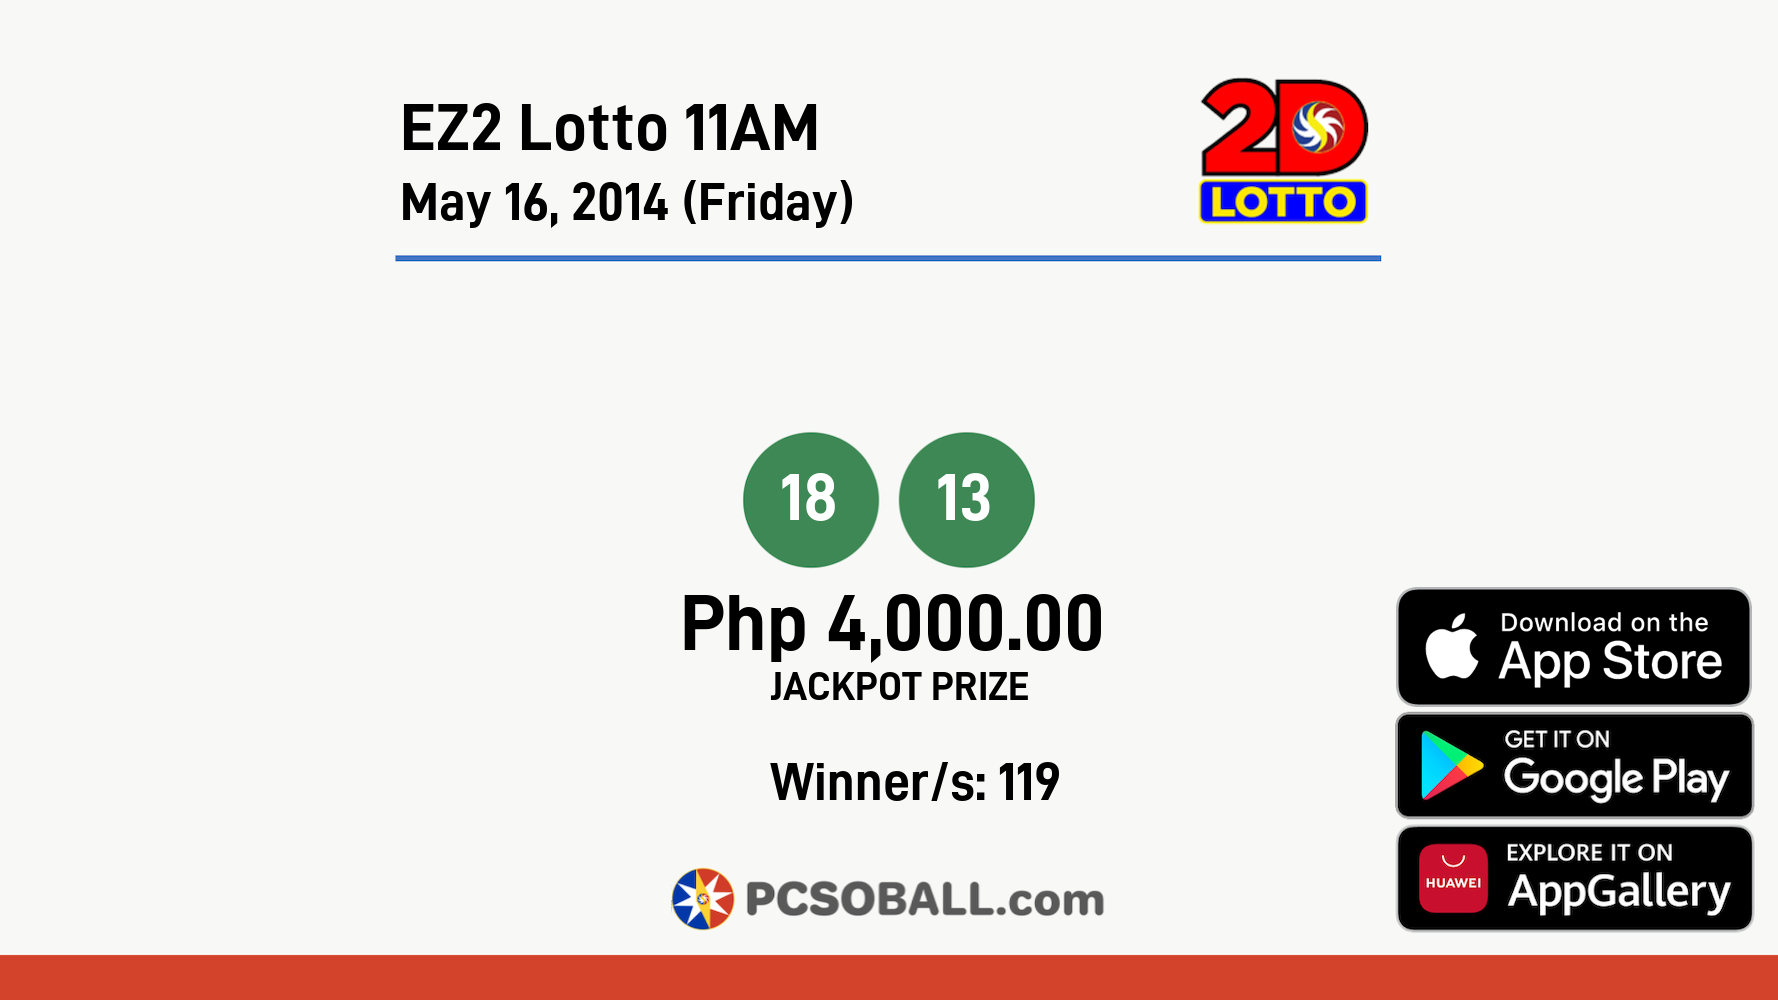 EZ2 Lotto 11AM May 16, 2014 (Friday) Result